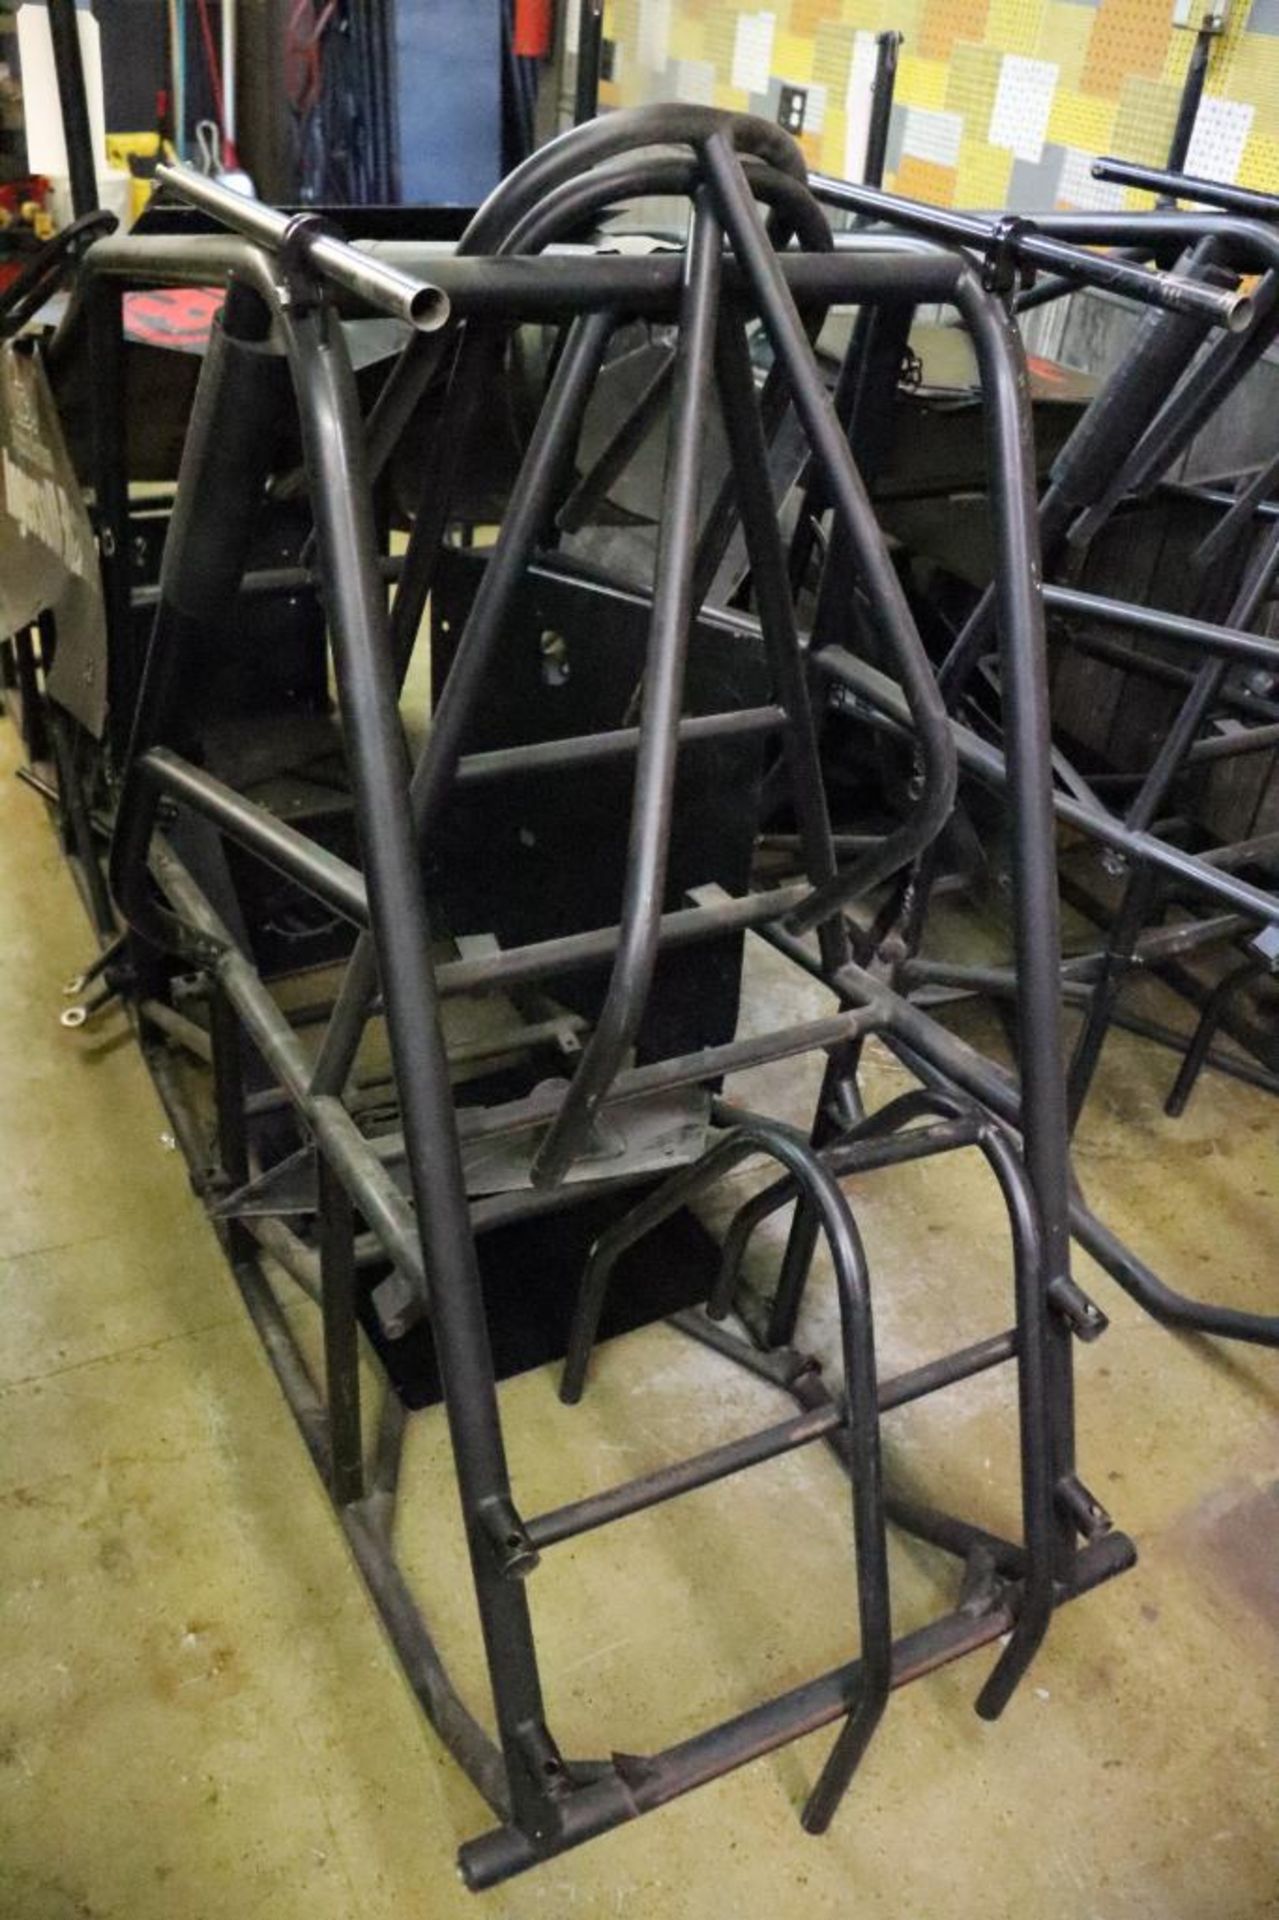 Smith Ingersoll-Rand sprint car w/ body panels & components - Image 16 of 27